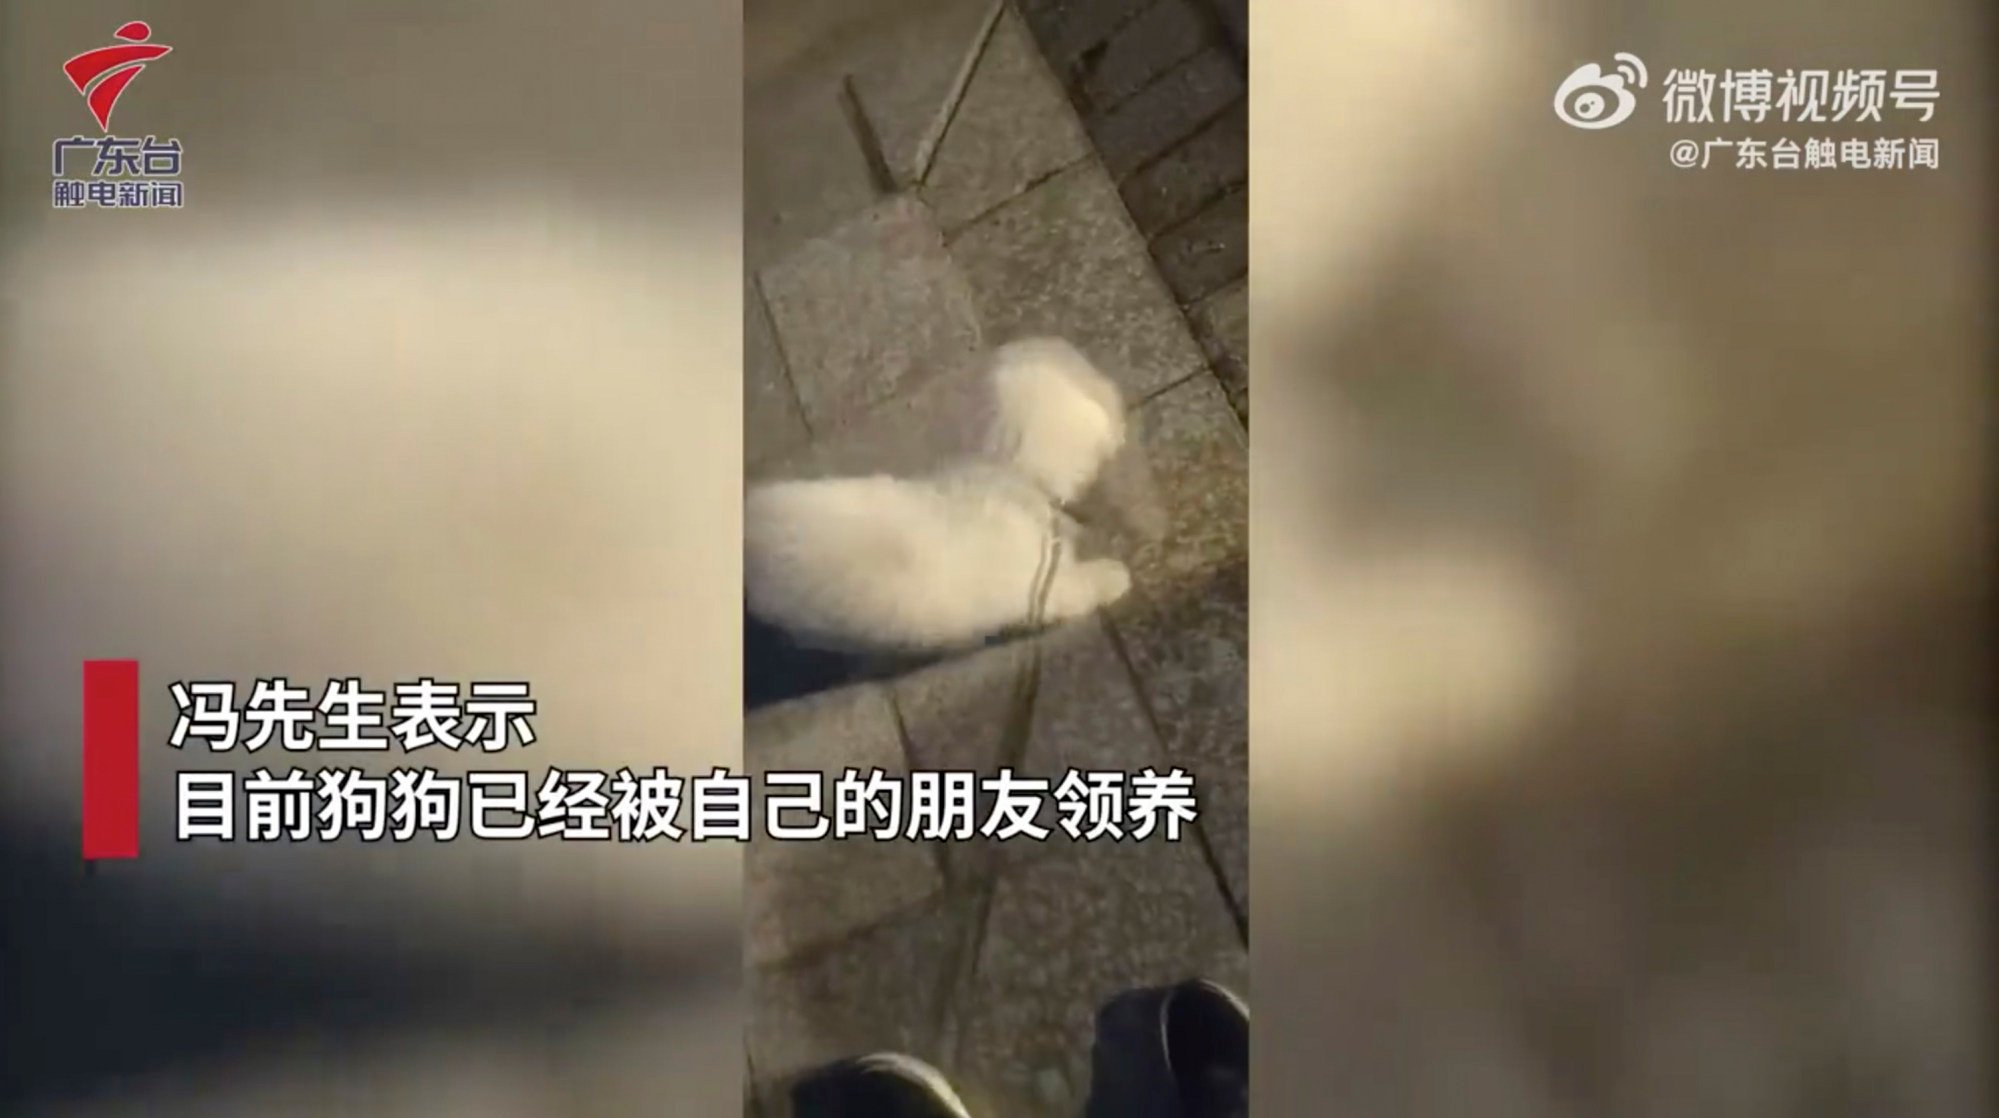 A security guard saw the animal and came to its rescue. Photo: Weibo